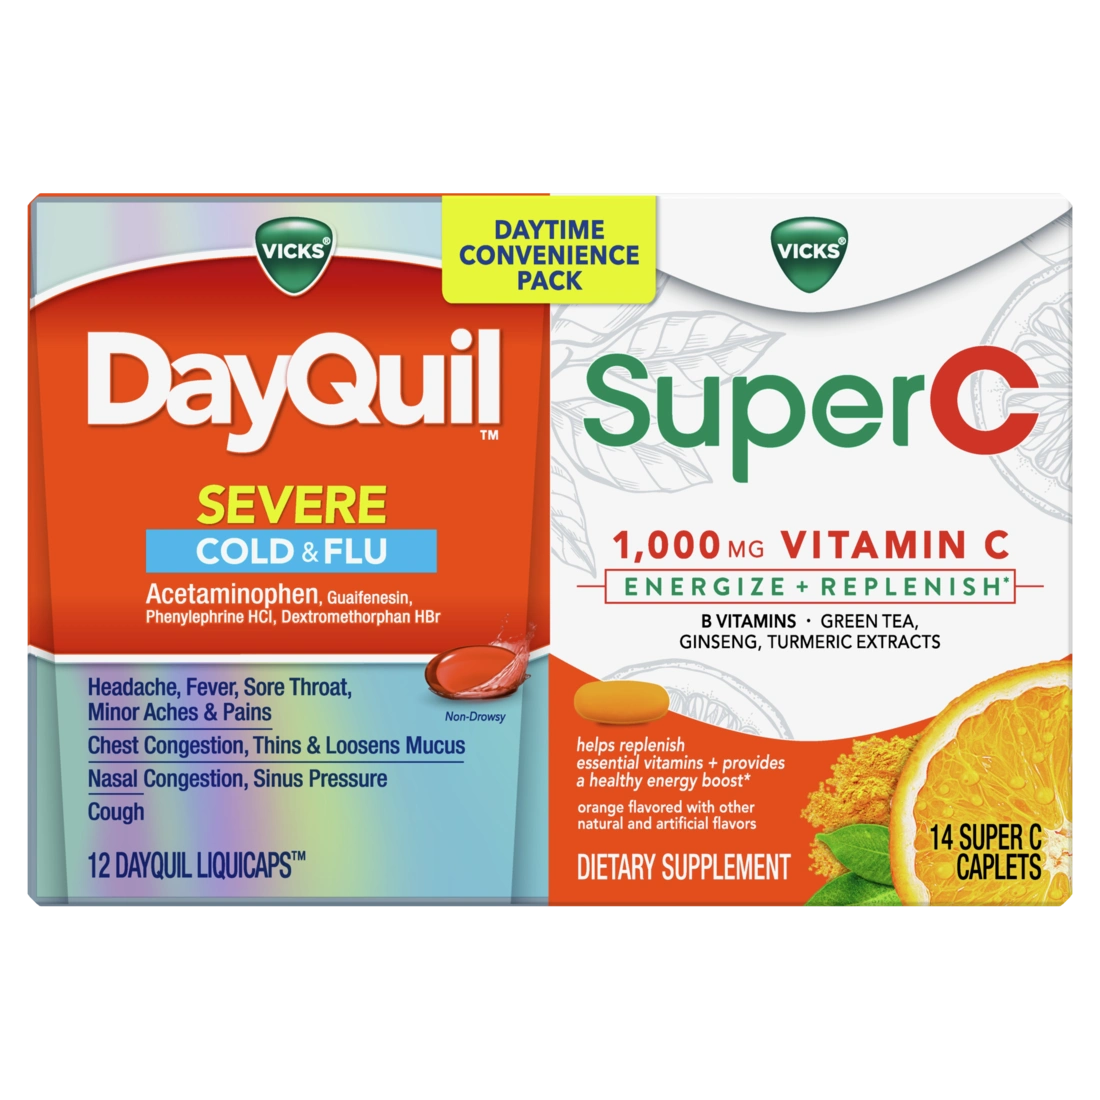 Vicks DayQuil Severe + Super C Convenience Pack